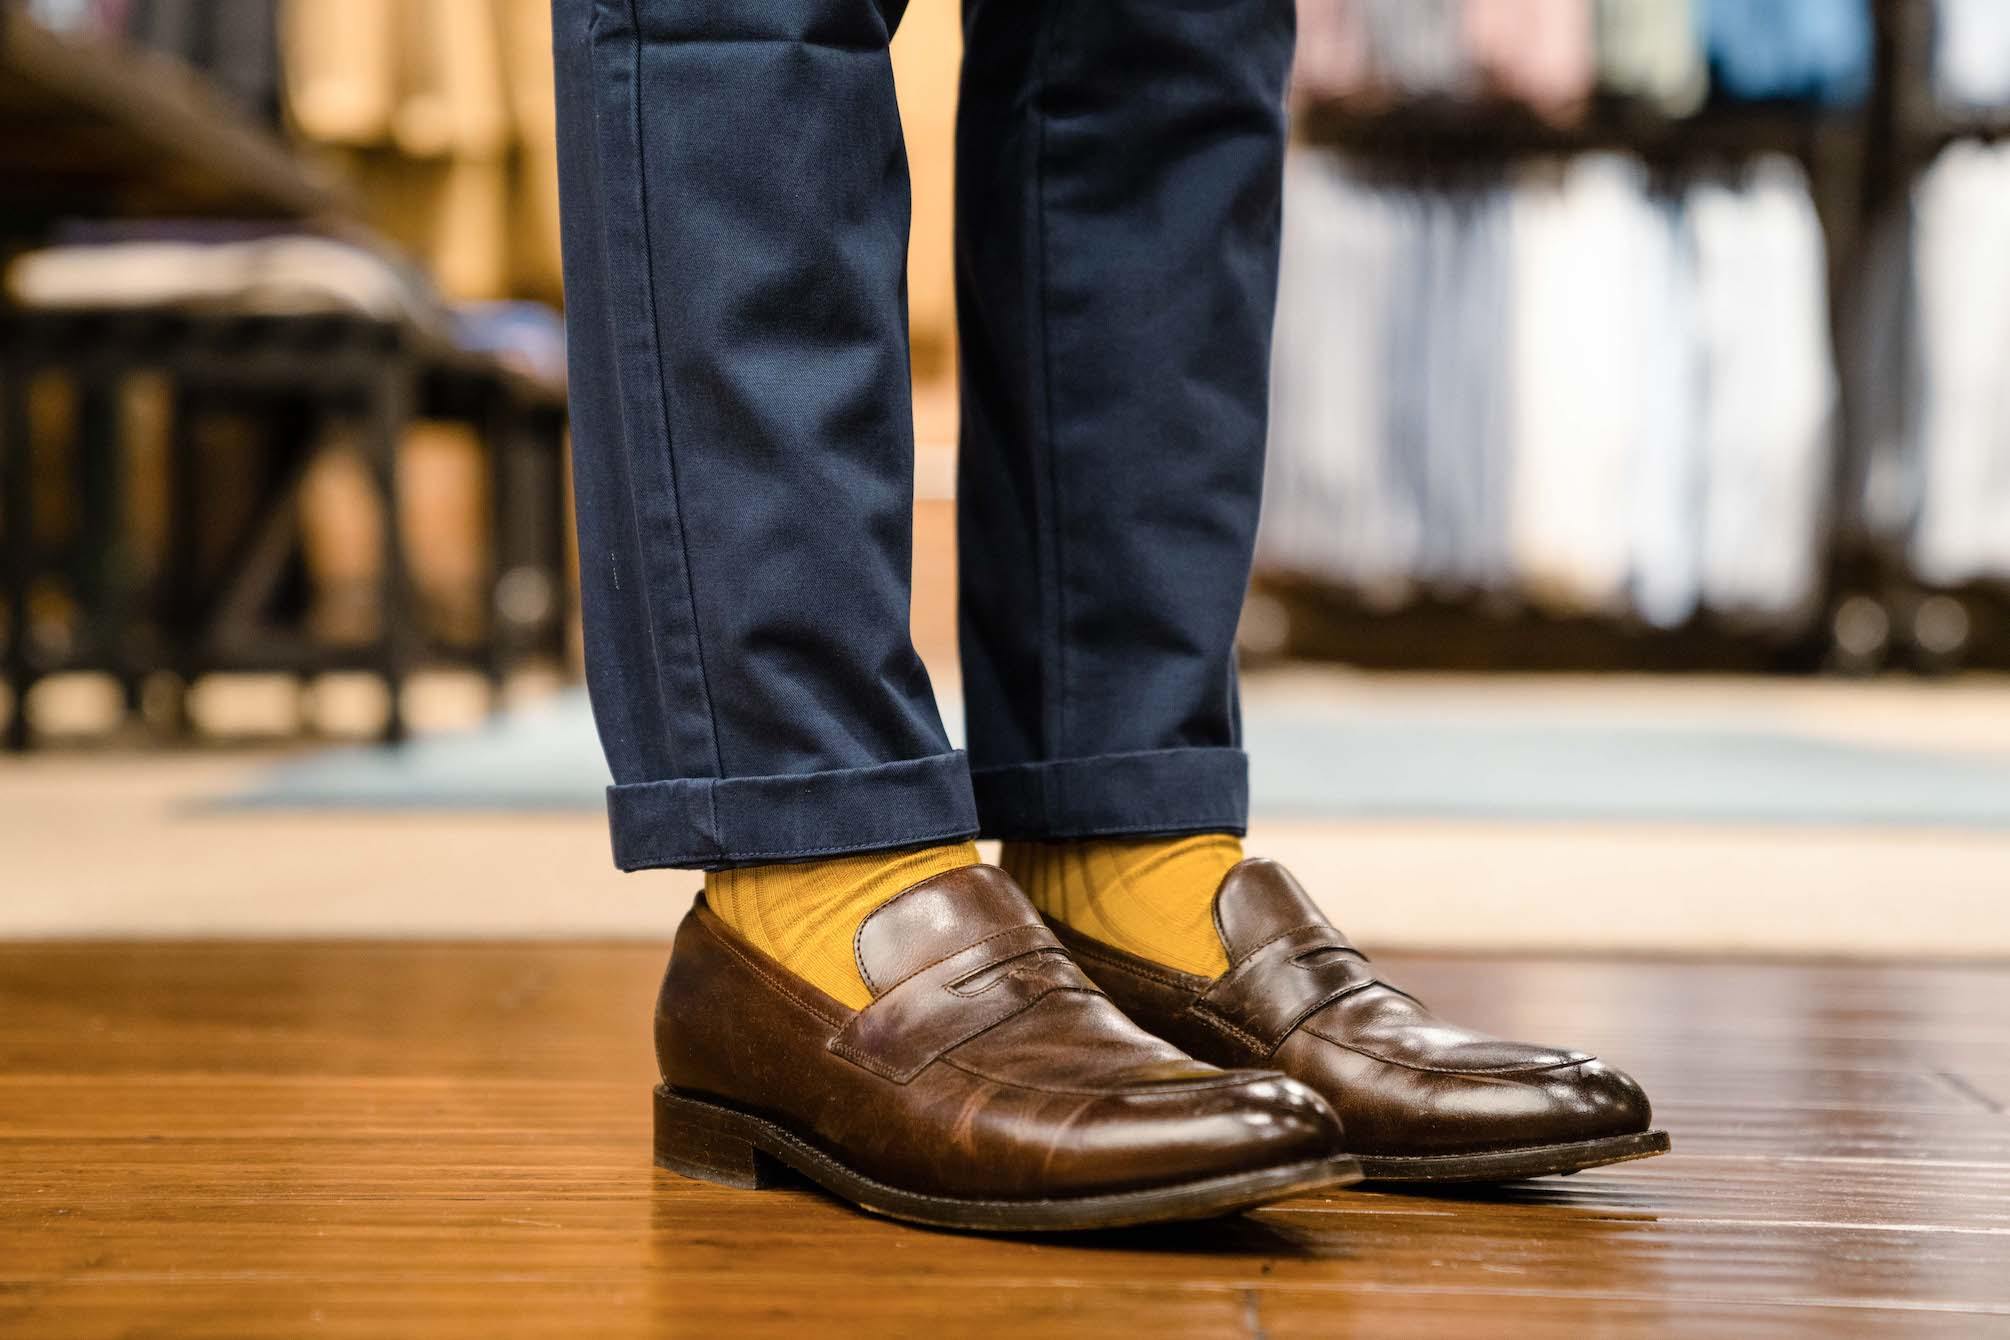 Men's loafers and socks: how to wear this duo with style? – Melvin